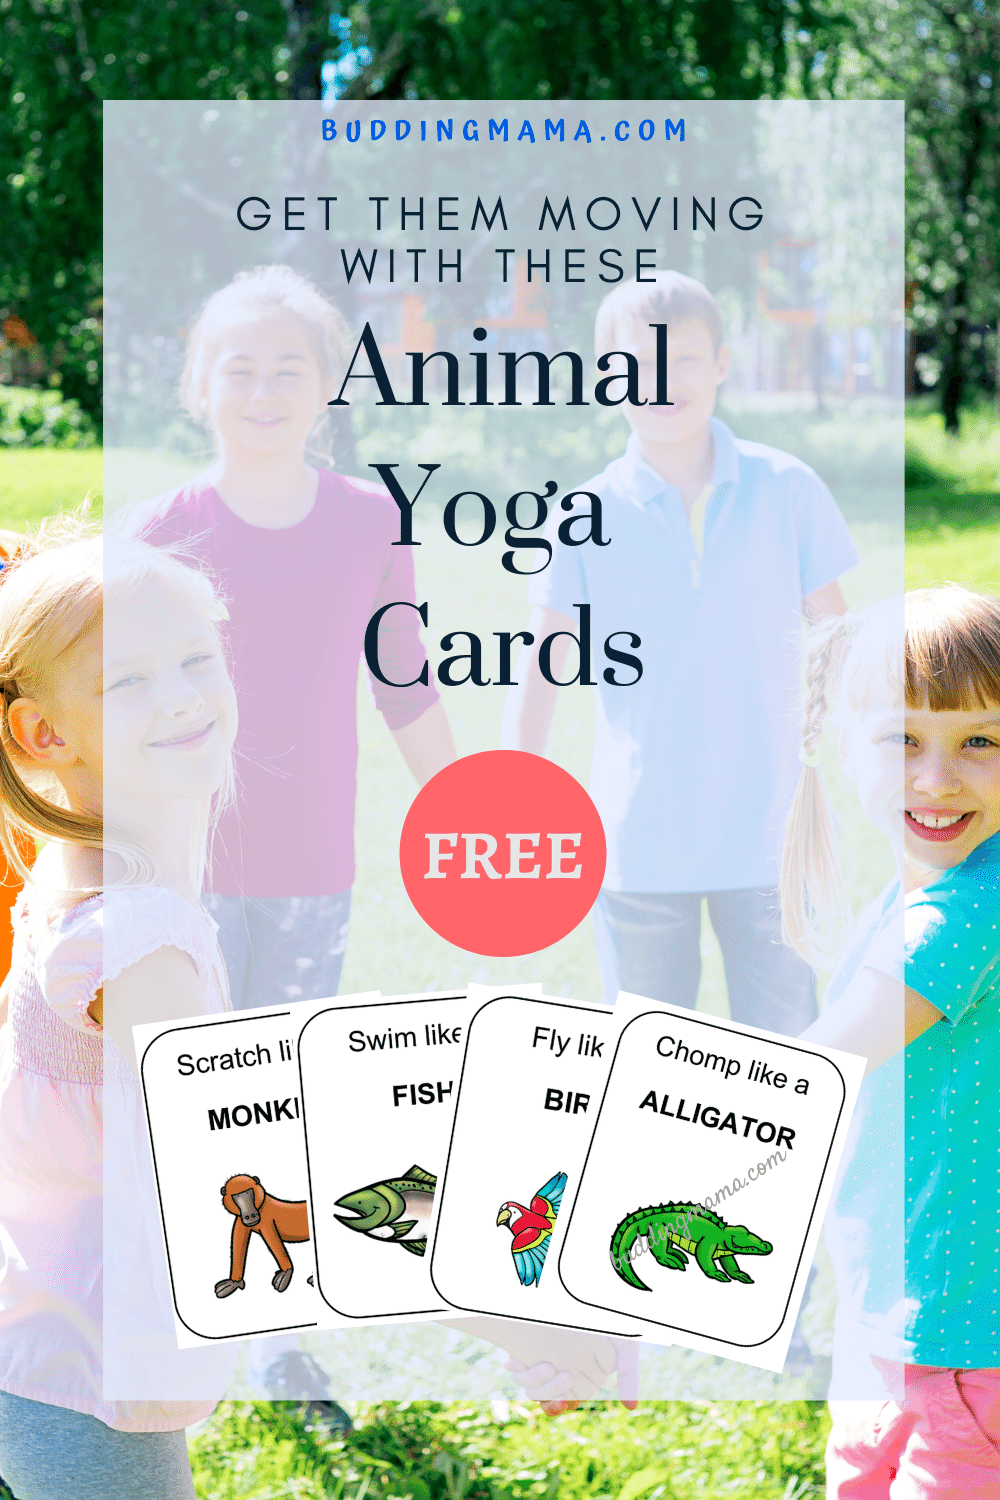 Free animal yoga cards to get your little ones up and moving today.